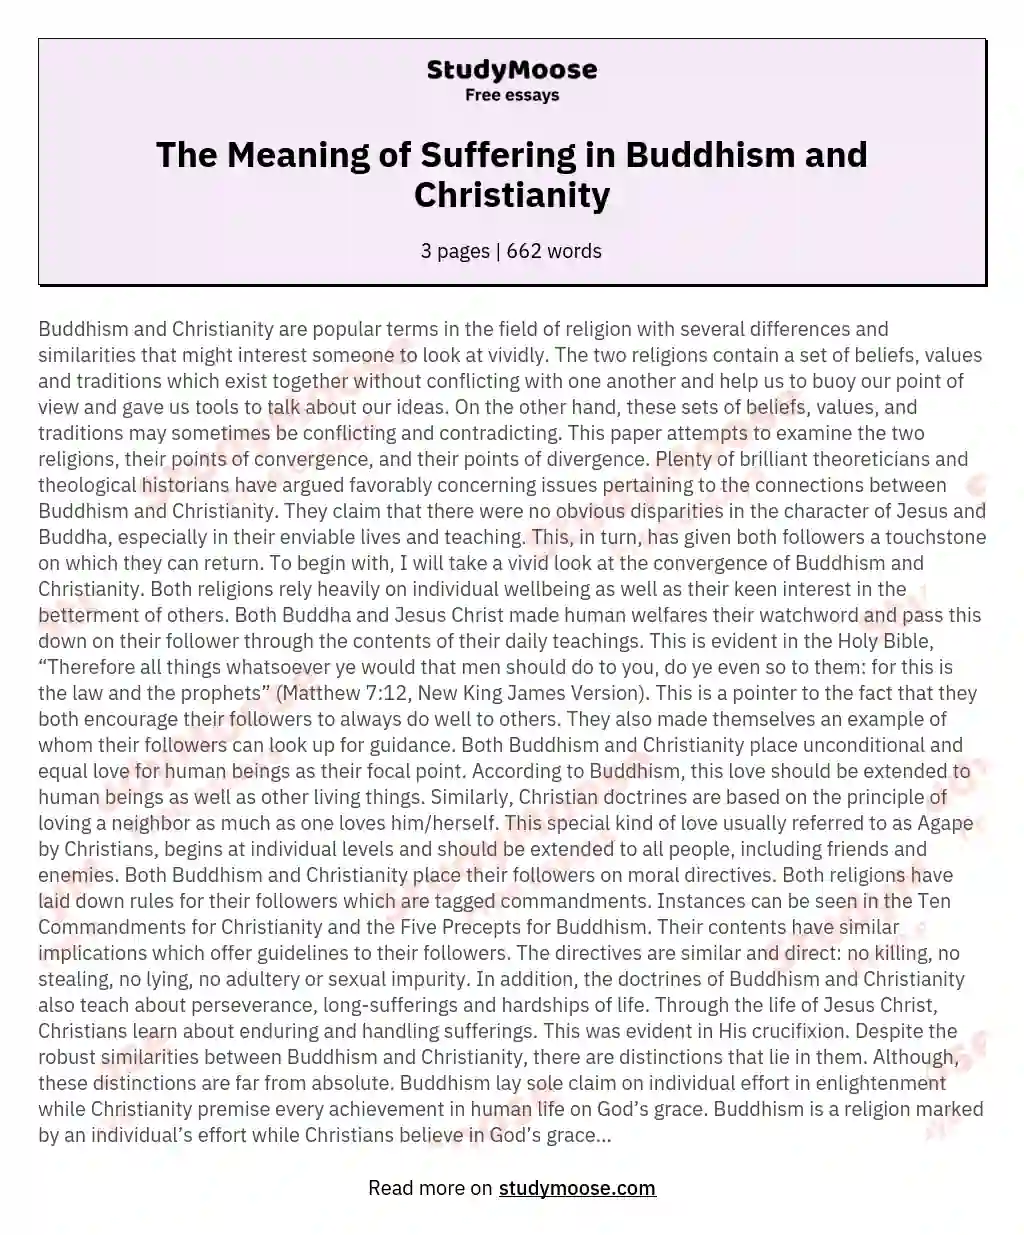 The Meaning of Suffering in Buddhism and Christianity